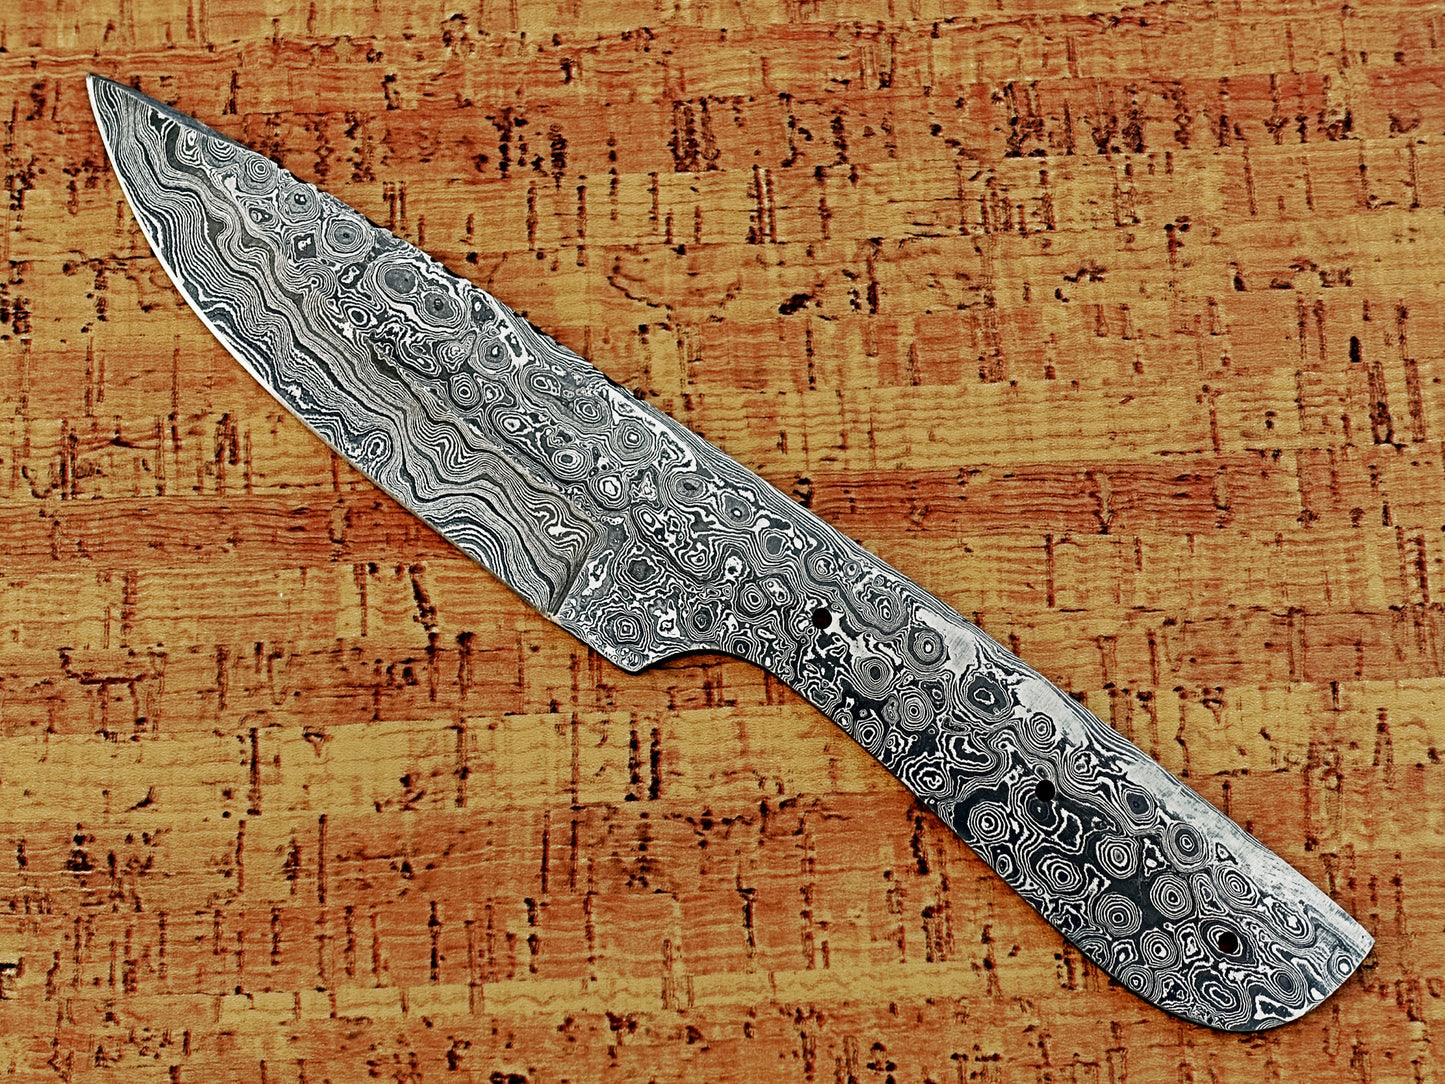 10 inches long drop point blank blade, hand forged Rain drop pattern Damascus steel blank blade skinning knife with 3 Pin hole oval scale, 4.5 inches cutting edge